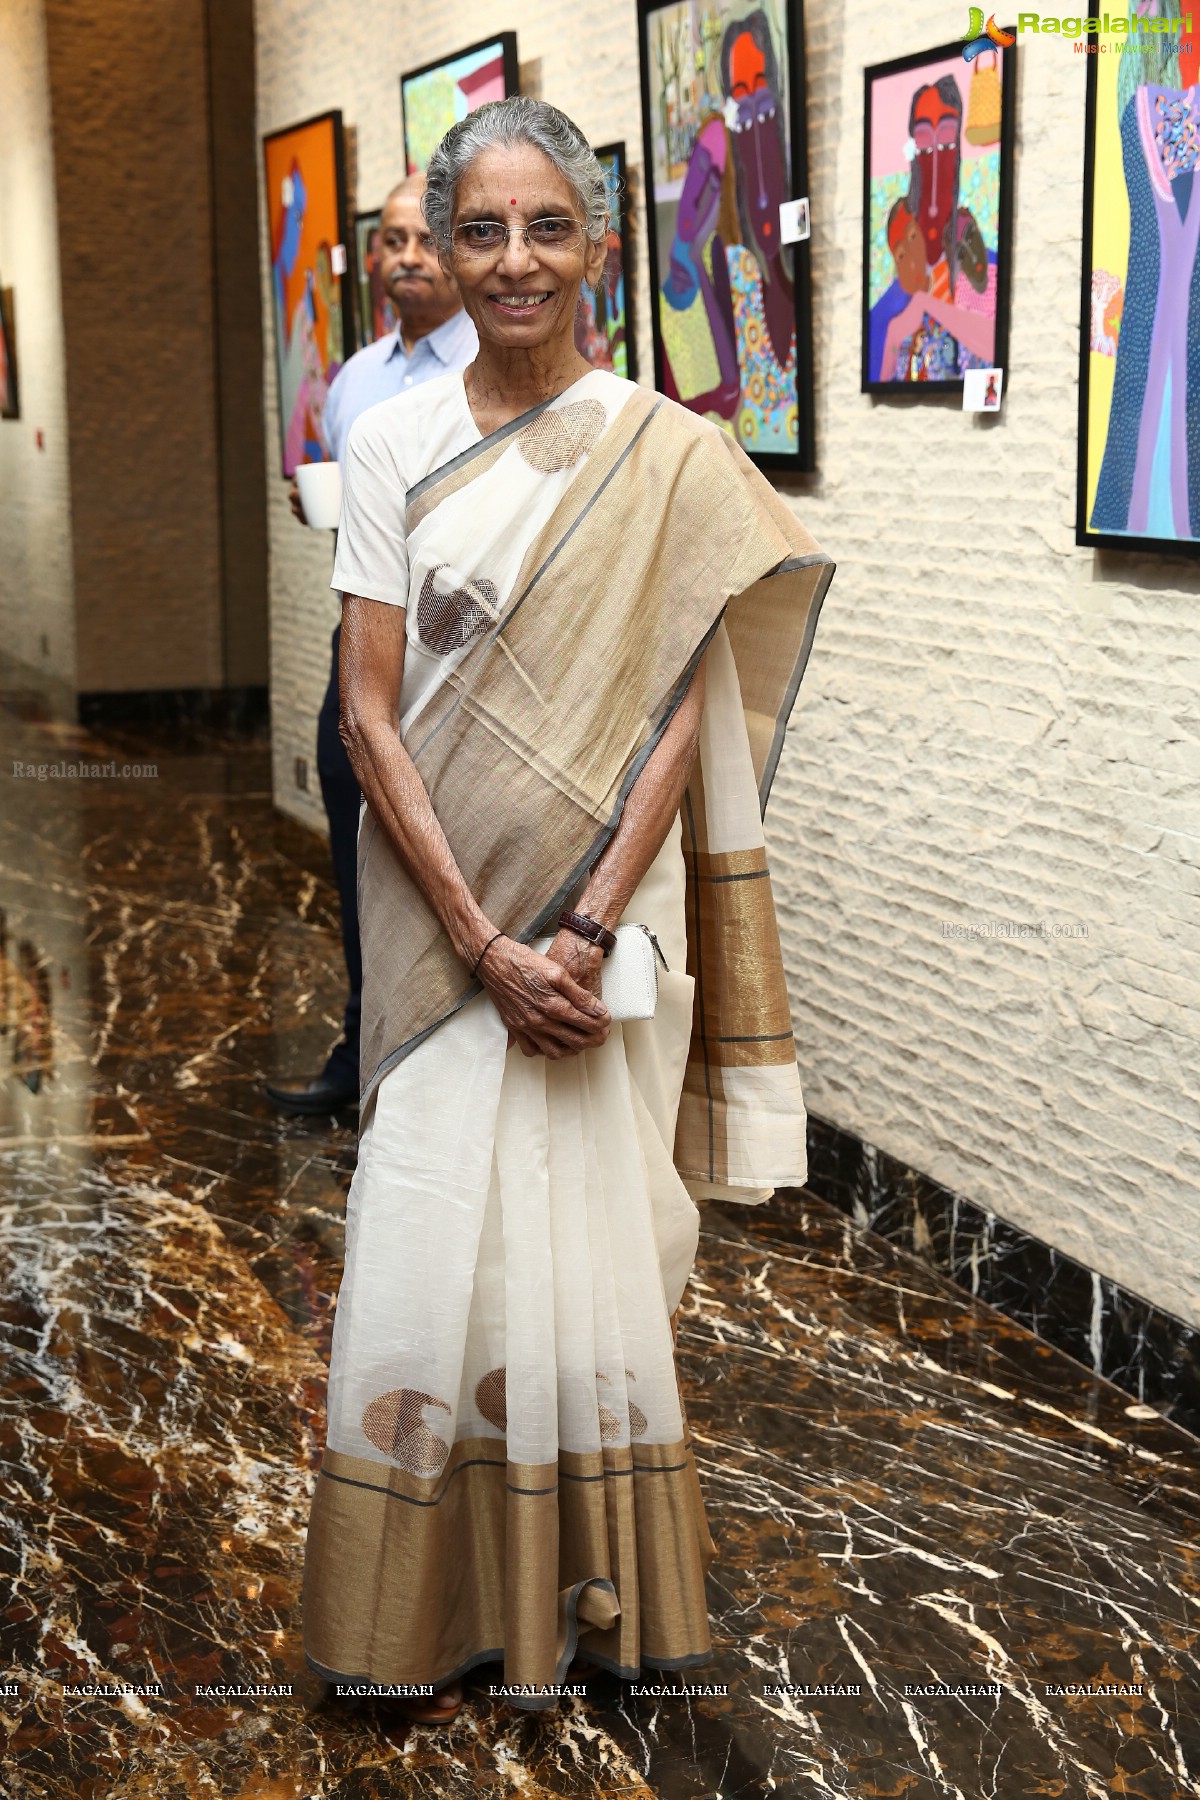 Collective Conscience - An Exhibition of Paintings & Sculptures by Deepa Nath at Art Walkway, Park Hyatt